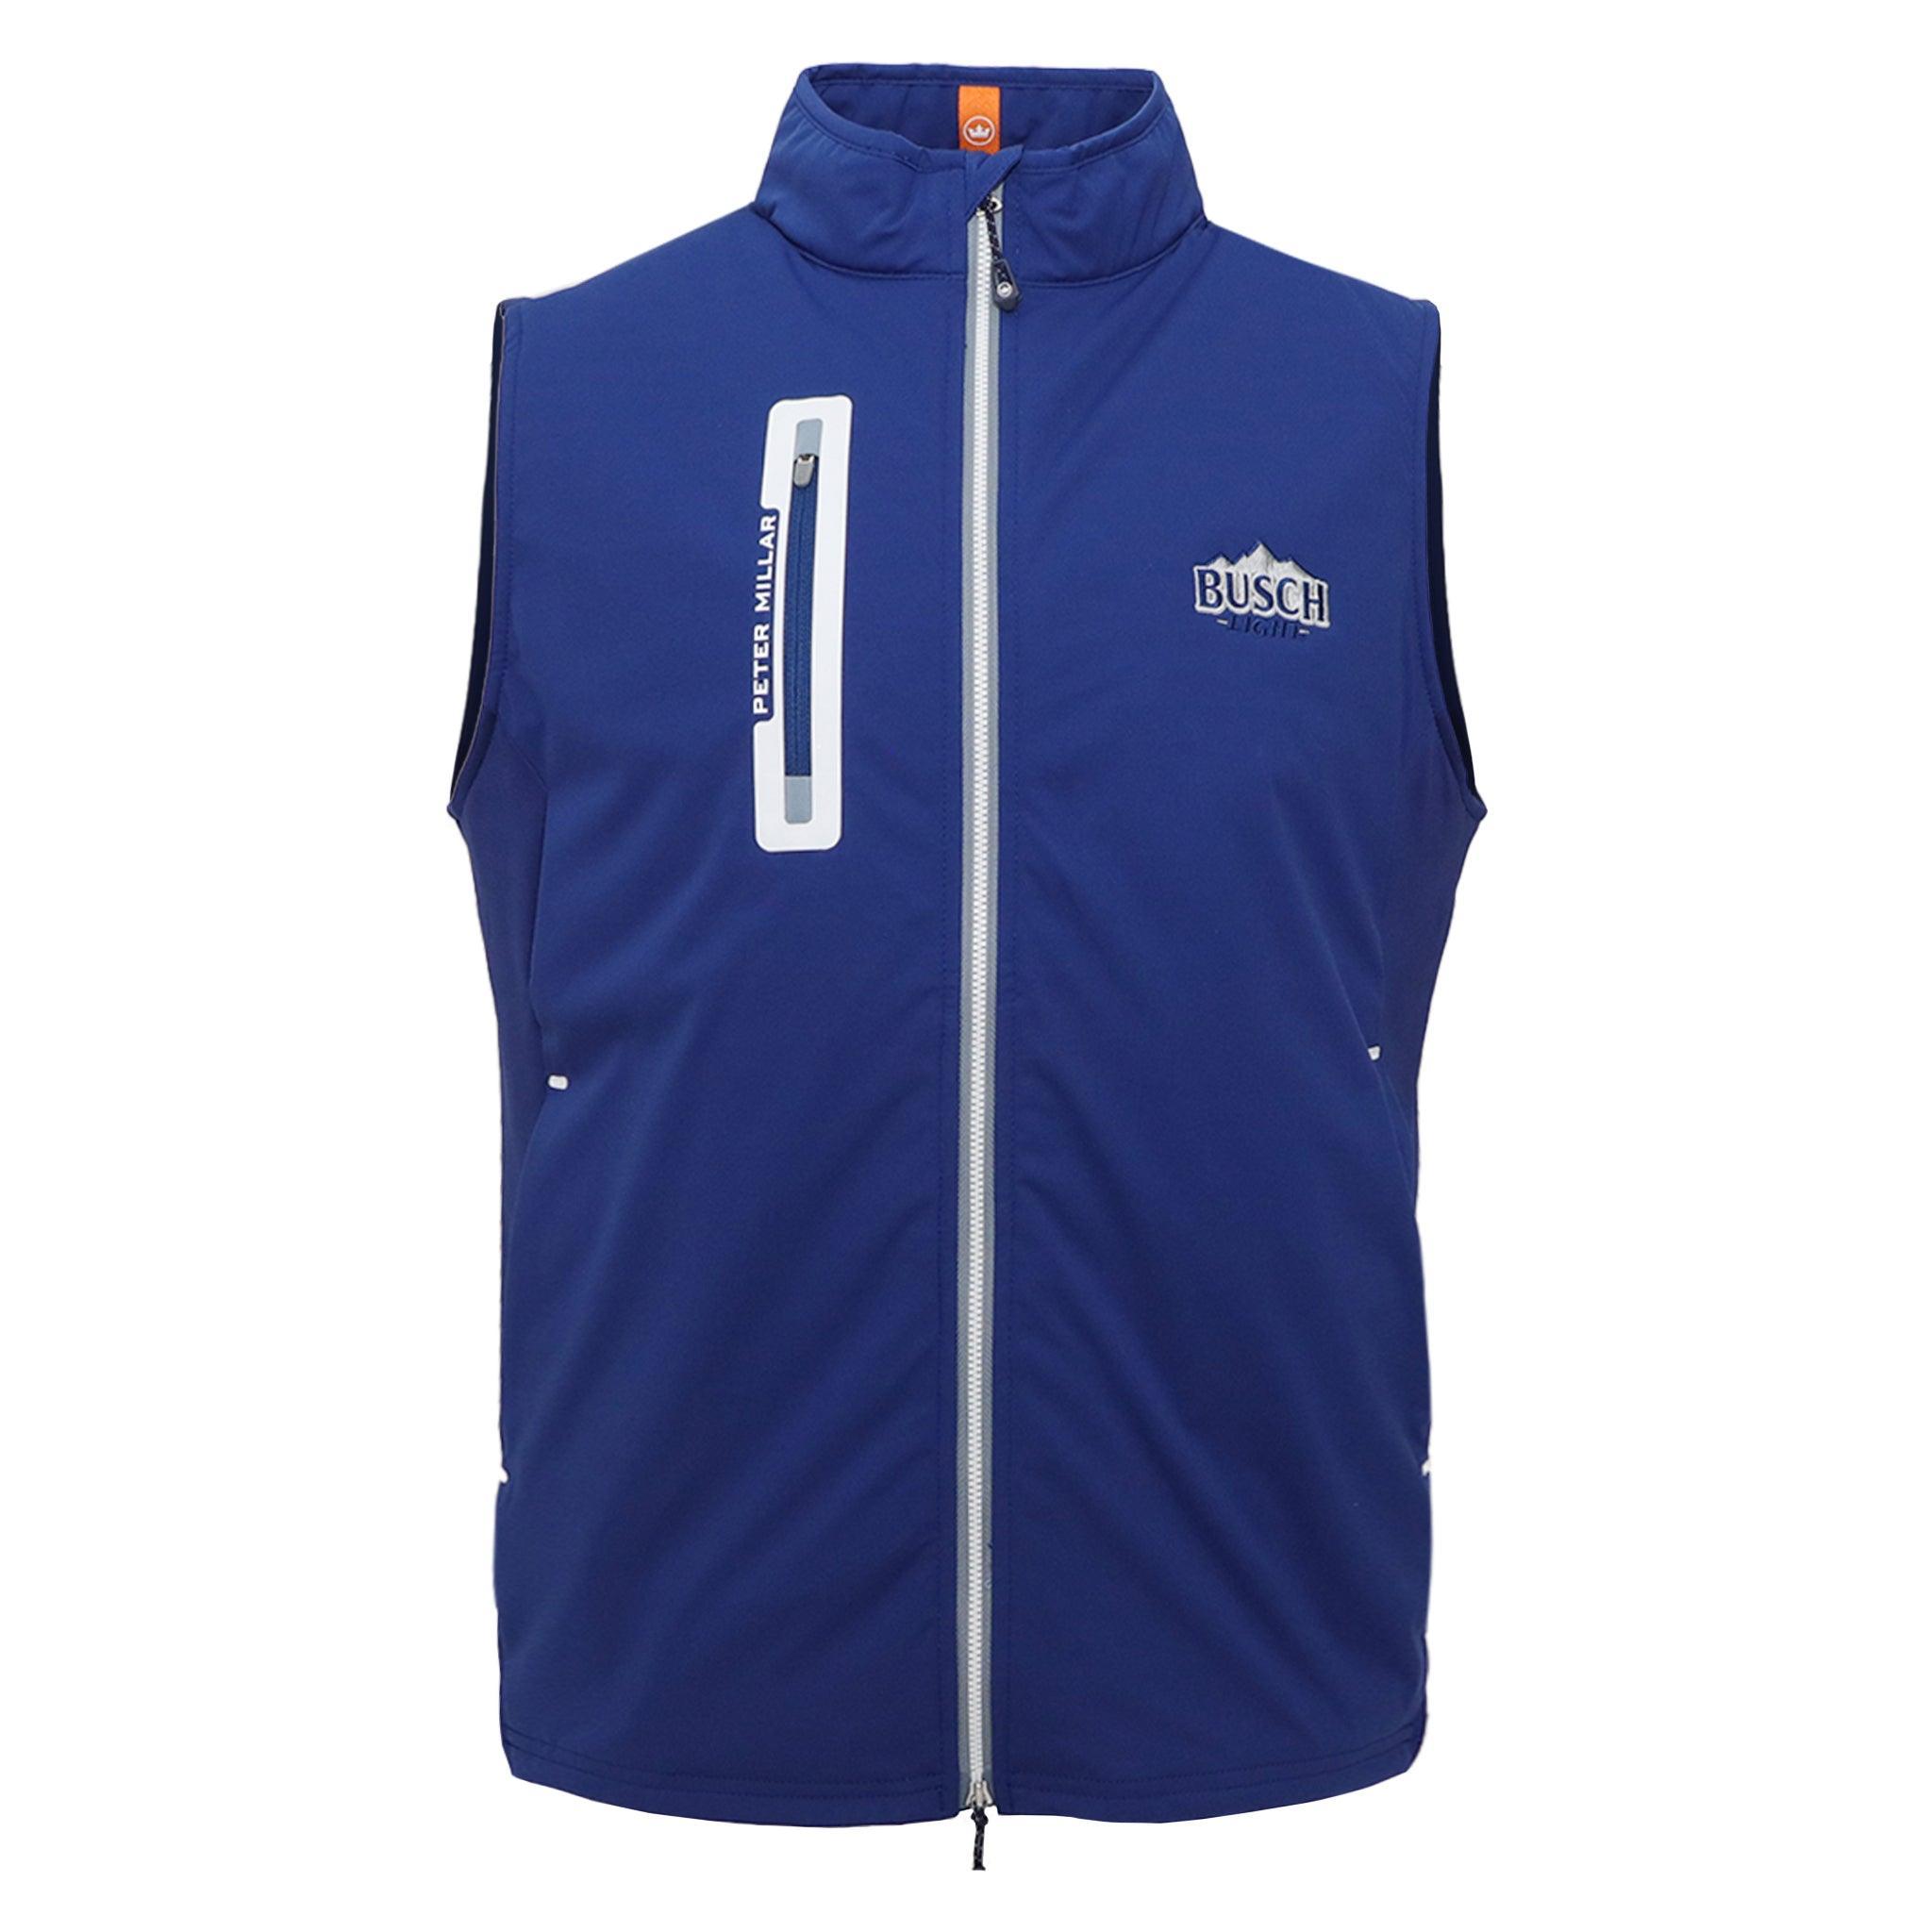 Navy Busch Light Full zip Vest with Busch Light logo on front left chest and zipper pocket on front right chest.